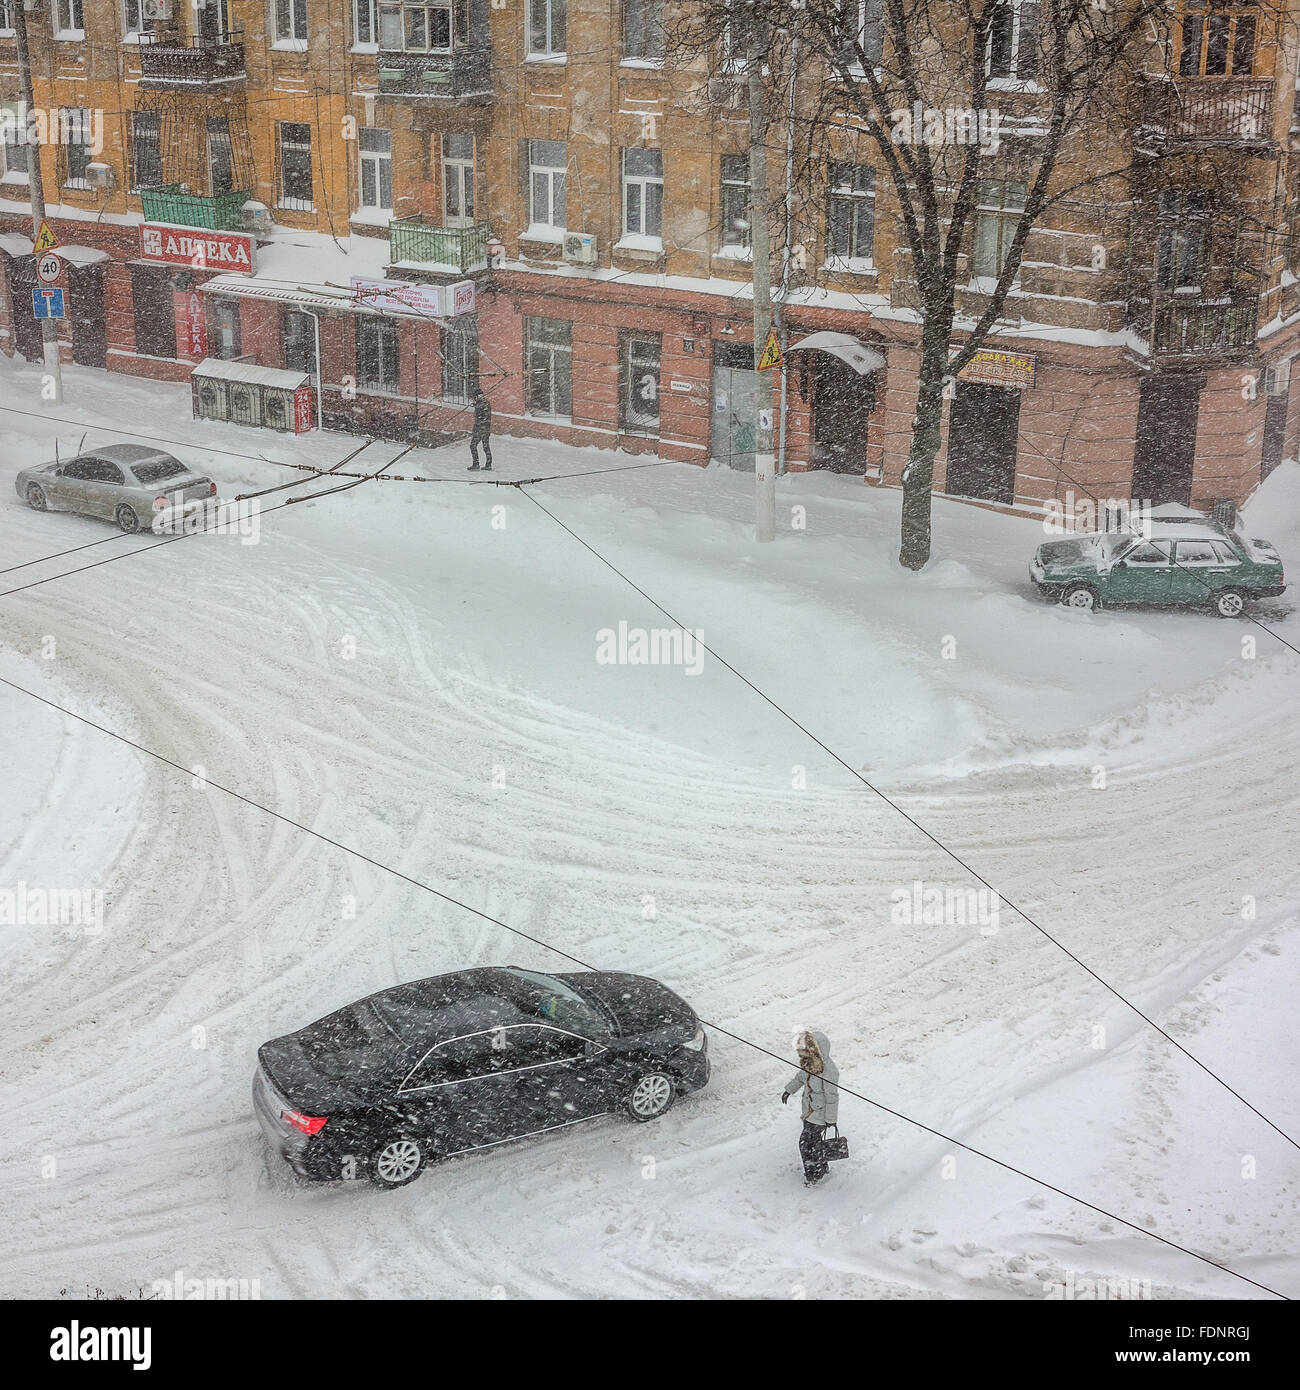 Odessa, Ukraine - January 18, 2016: A powerful cyclone, storm, heavy snow paralyzed the city. People walking on the street durin Stock Photo